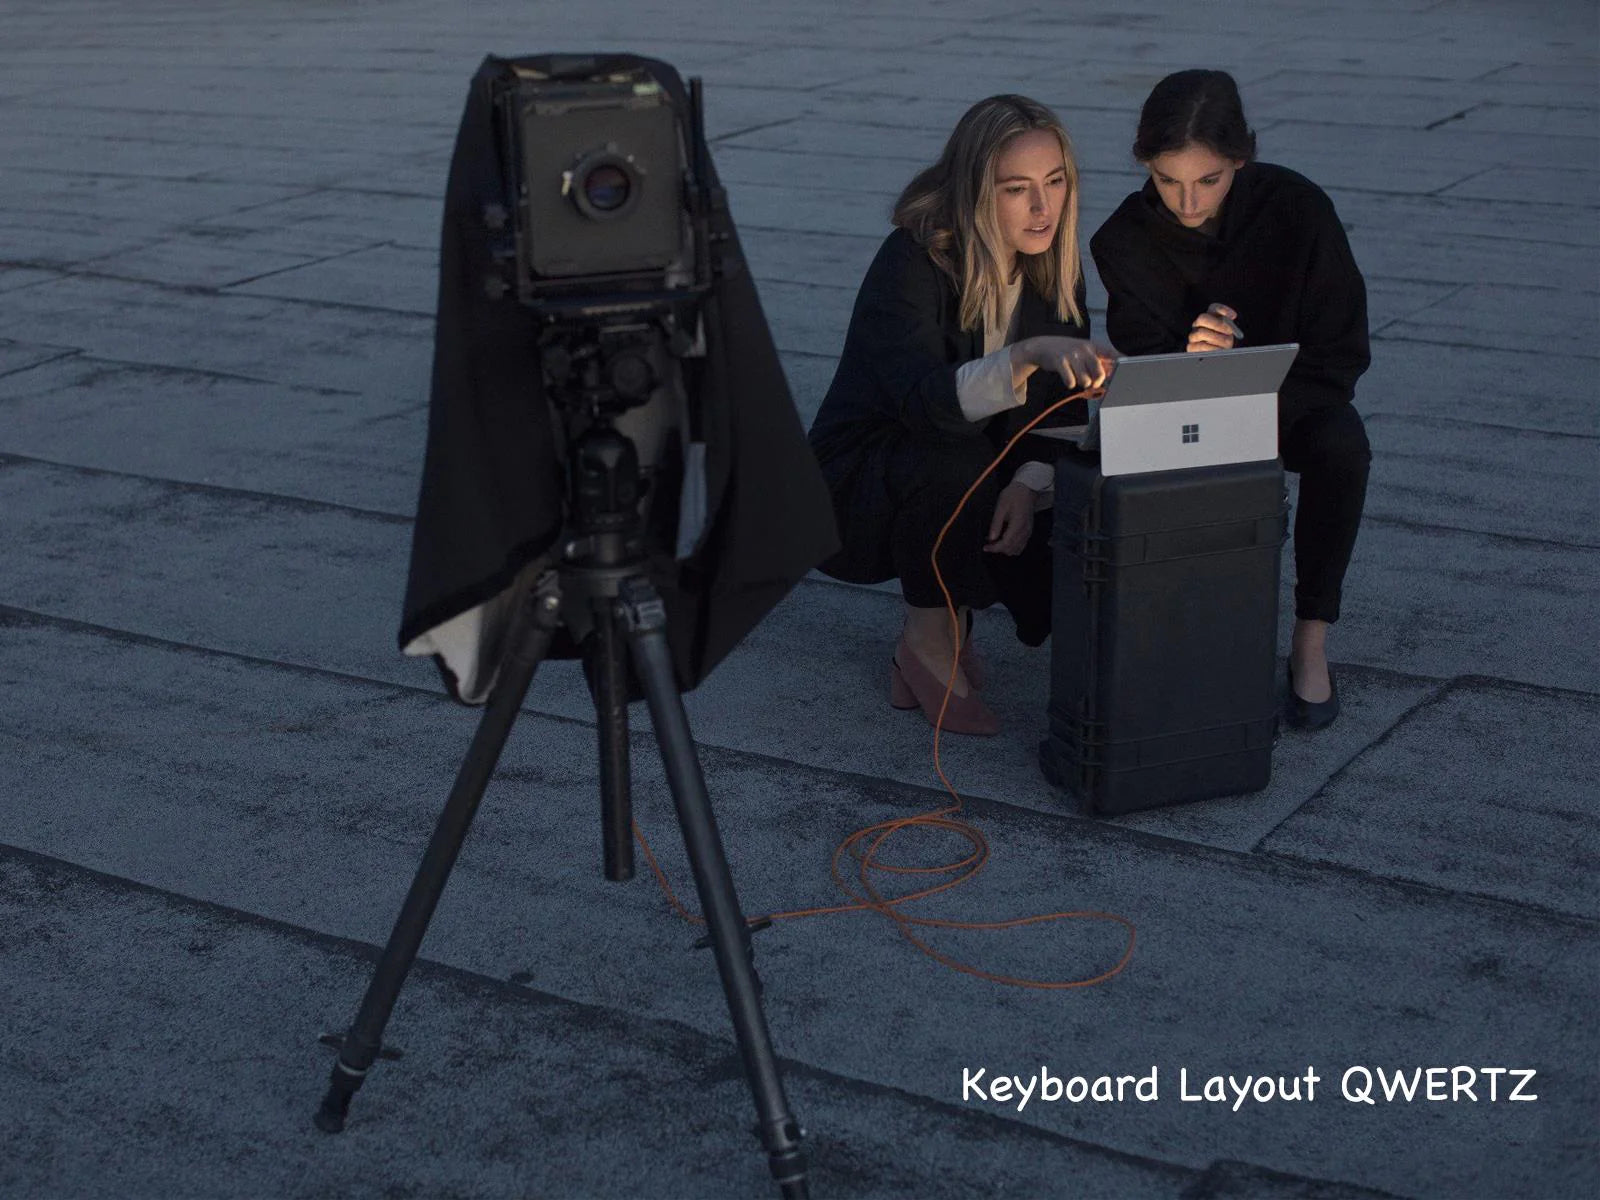 Life image of to females working on notebook microsoft surface pro connected to the camera